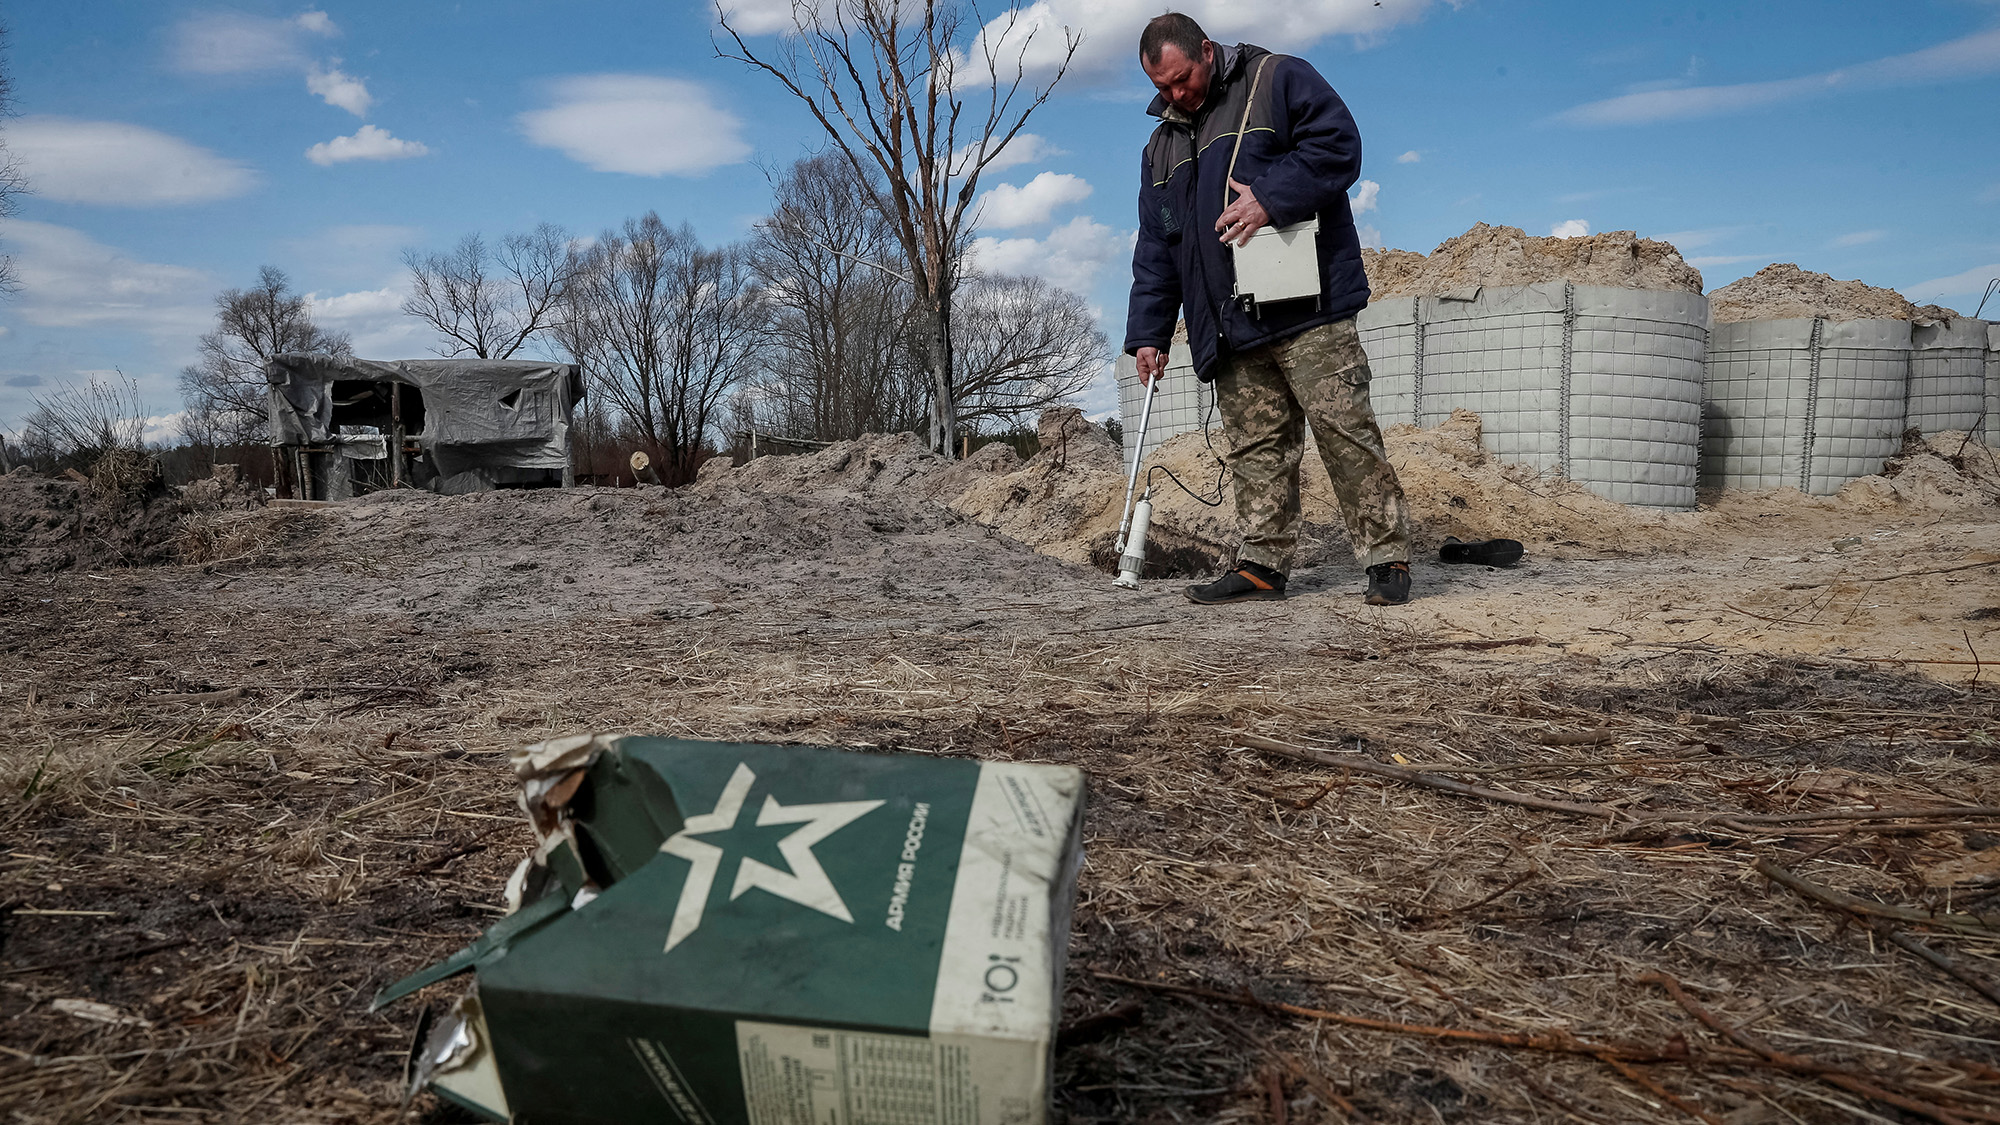 A dosimetrist measures the level of radiation around trenches dug by the Russian military in an area with high levels of radiation called the Red Forest near the Chernobyl Nuclear Power Plant, in Chernobyl, Ukraine on April 7.